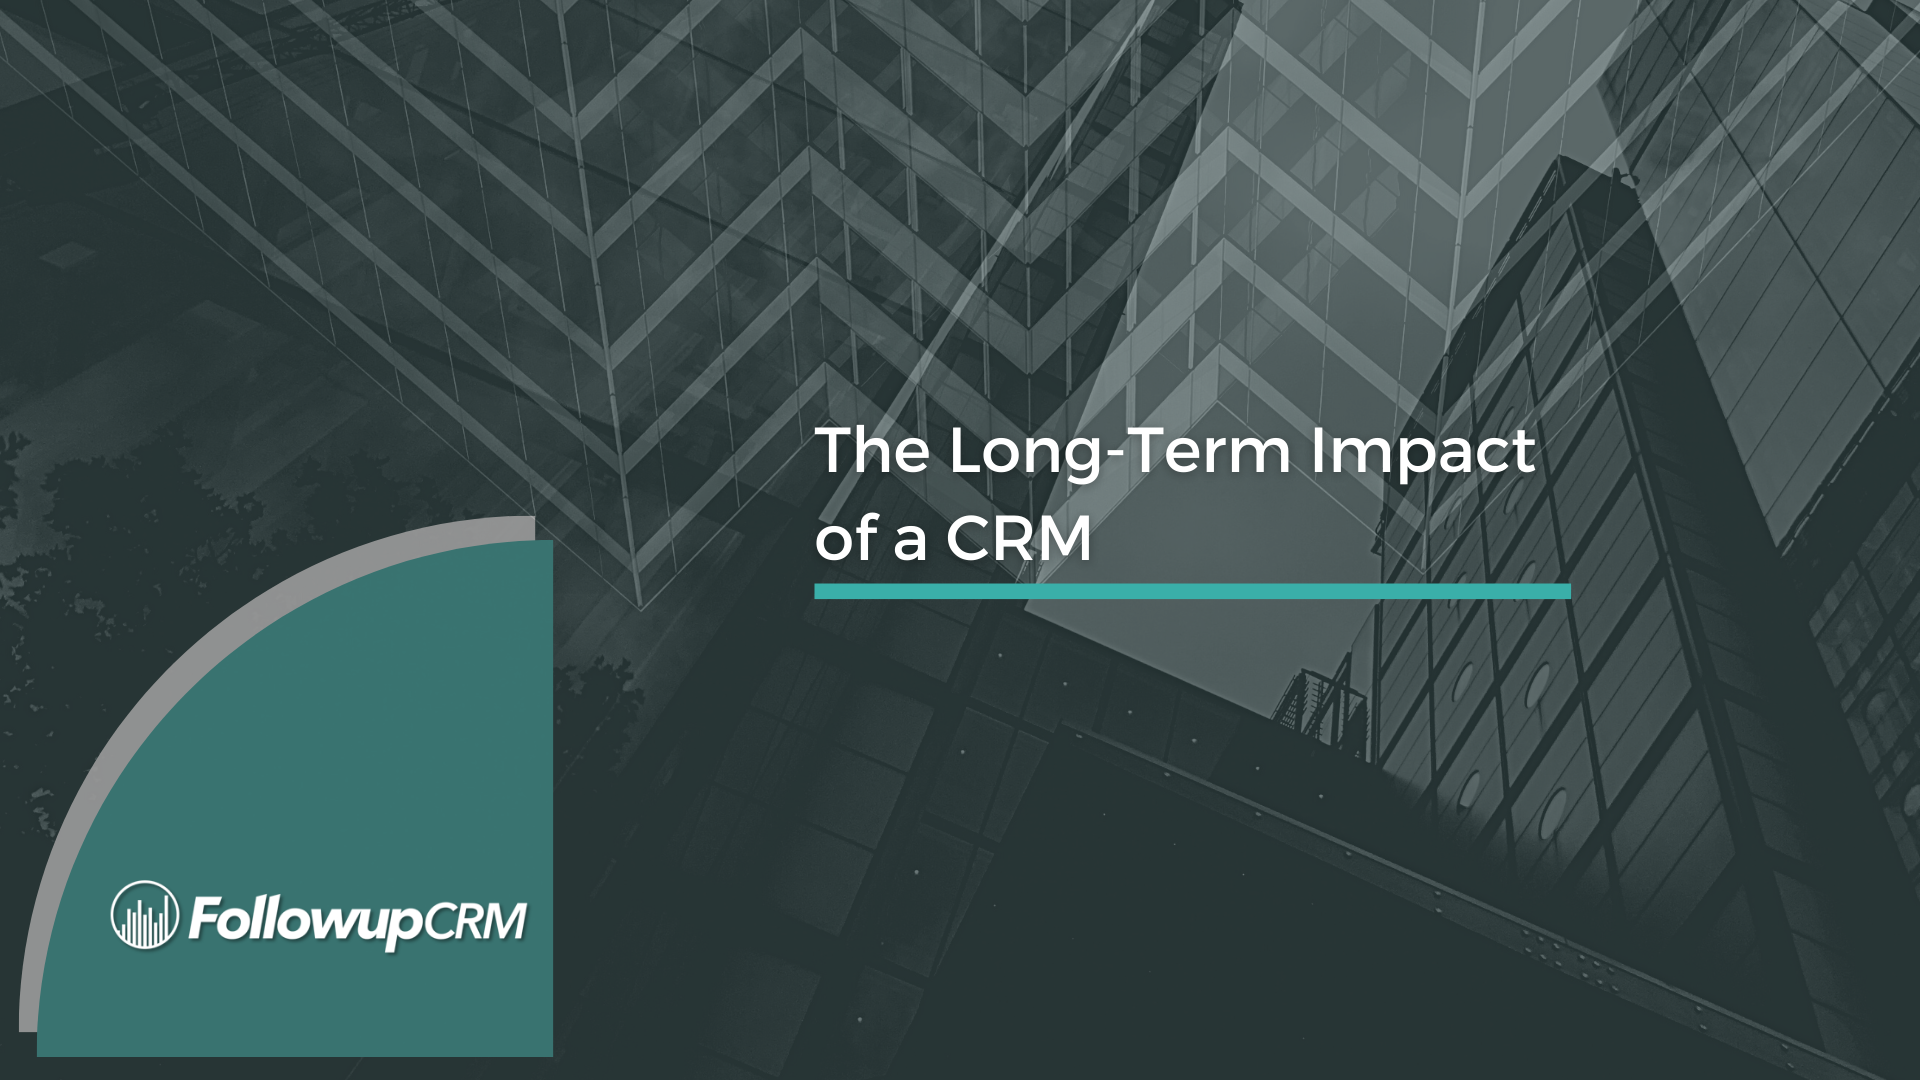 The Long-Term Impact of a CRM